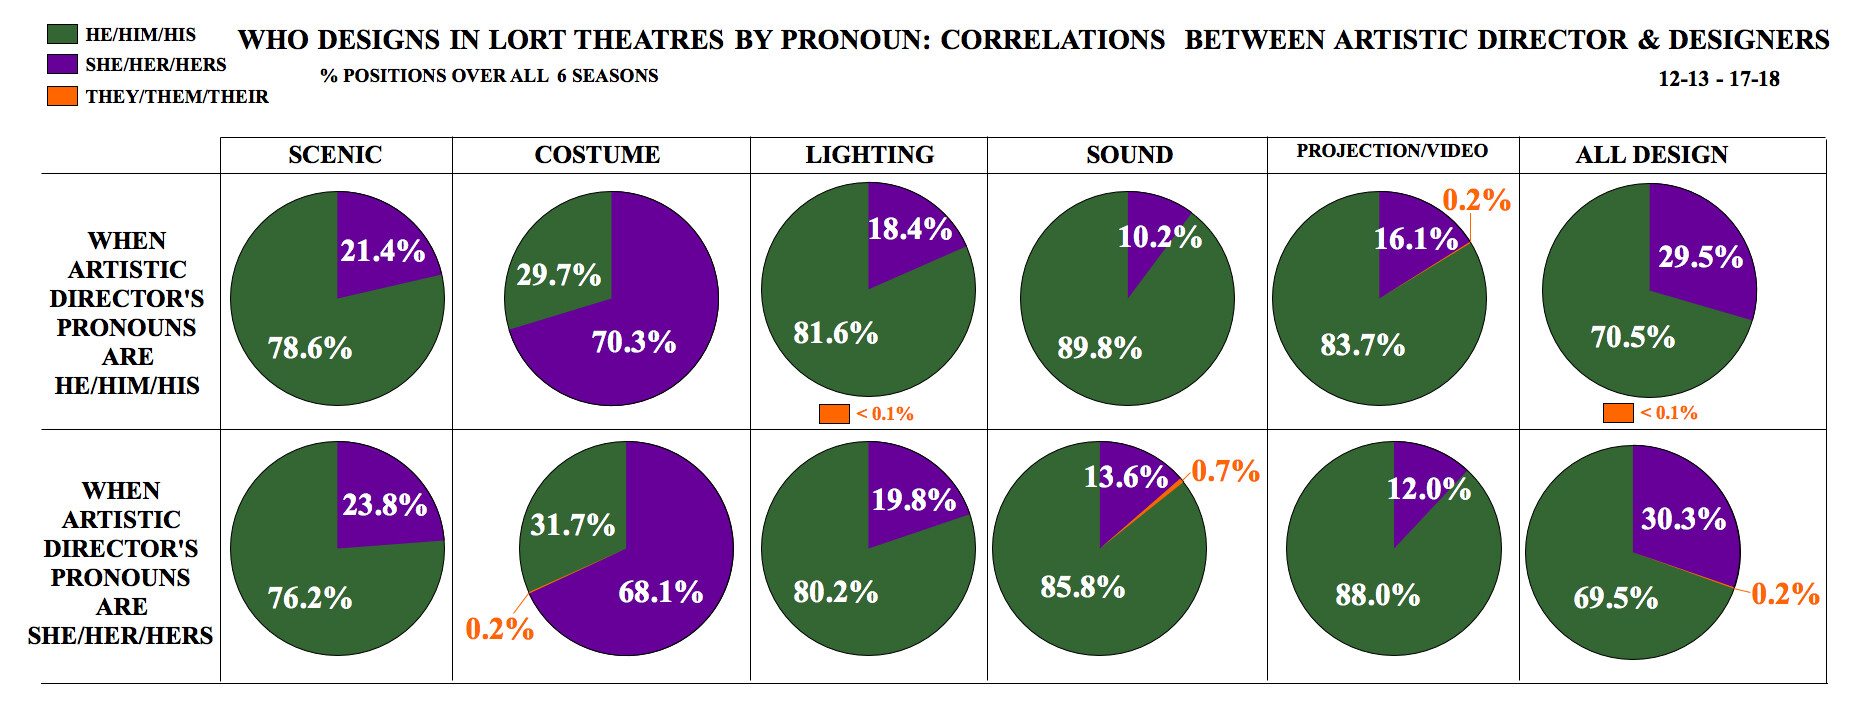 Who Designs in LORT Theatres by Pronoun: Correlations between Artistic Director & Designers